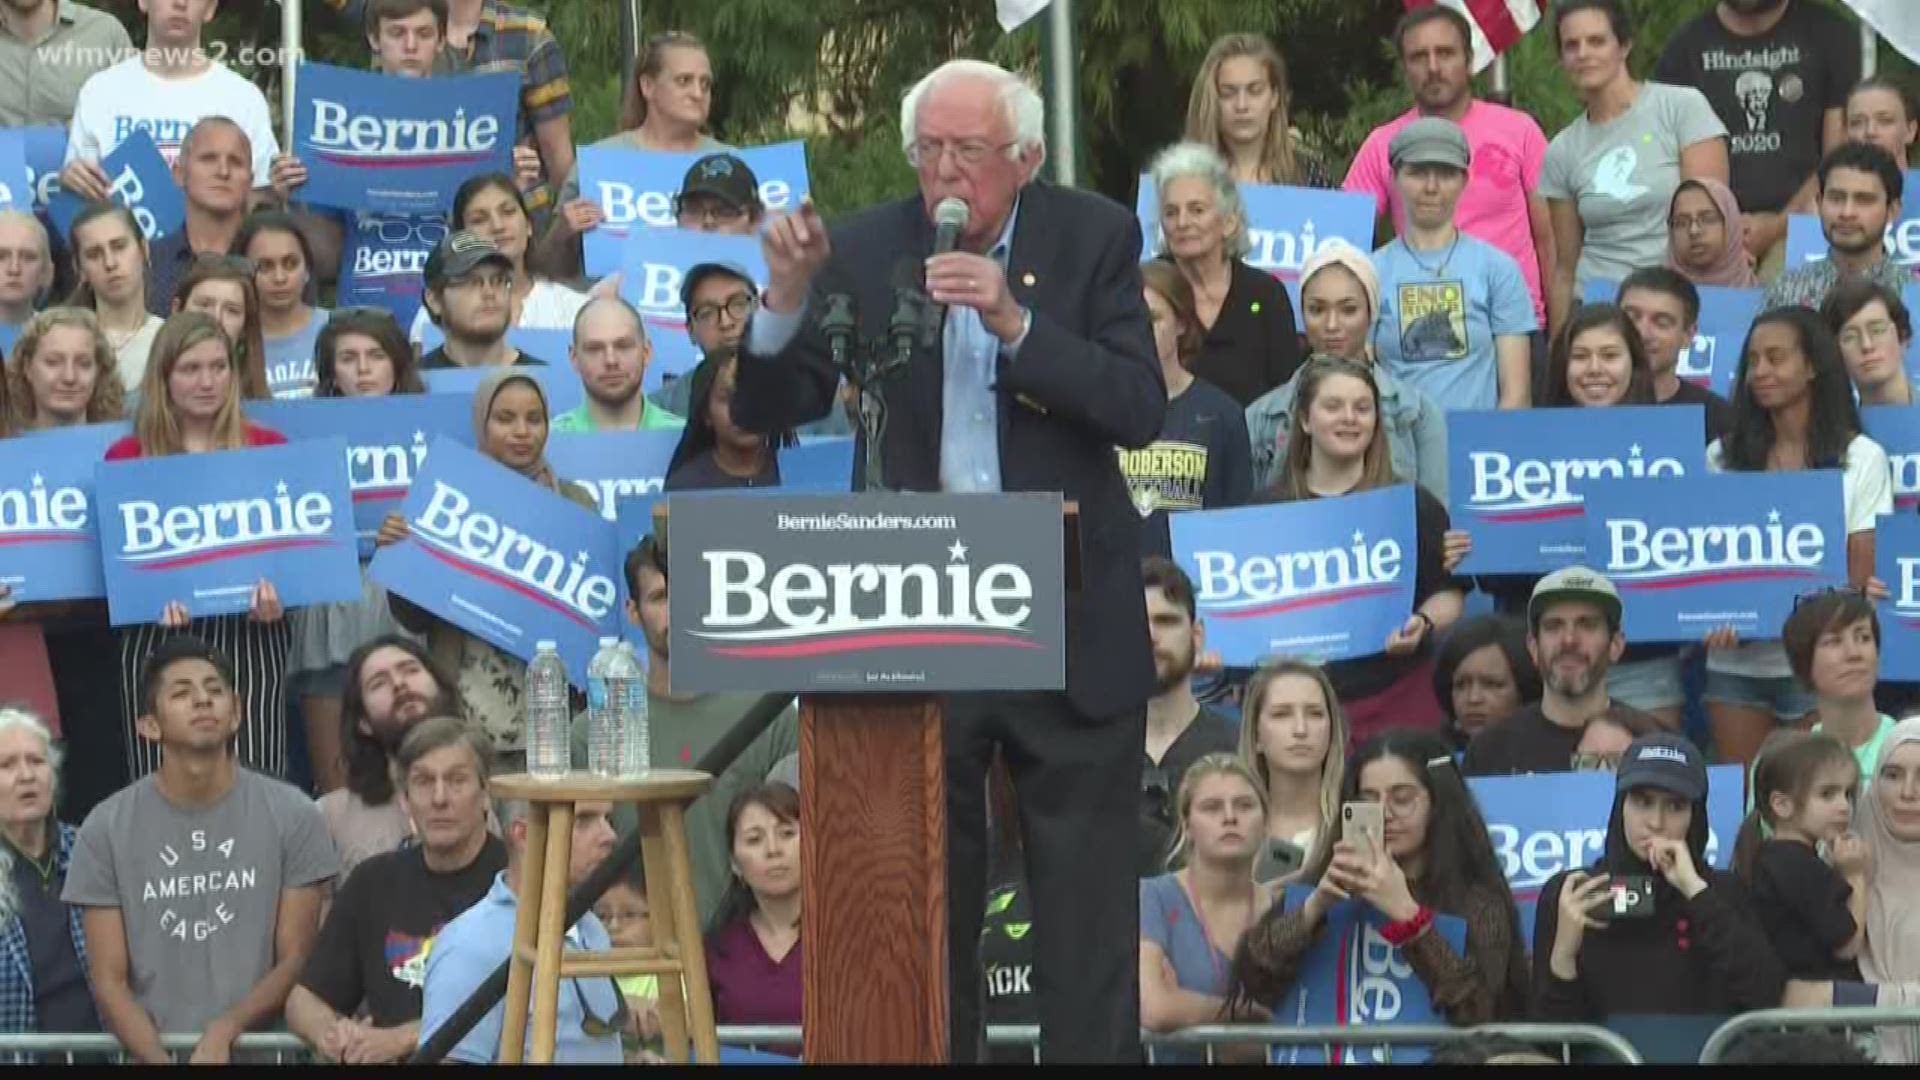 Many of those who waited for Vermont Senator Bernie Sanders came because they are worried about their bottom line.